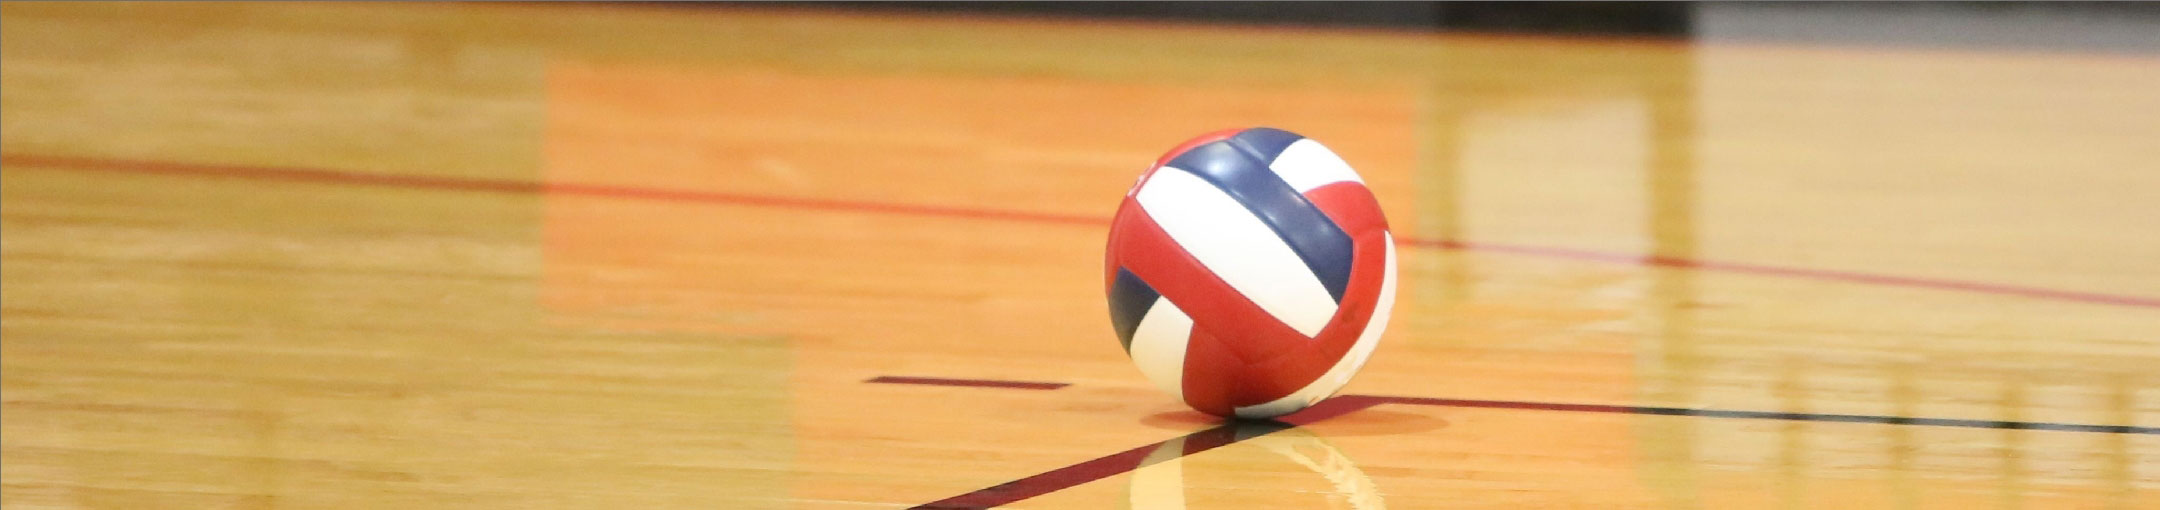 a volleyball sitting on a basketball court